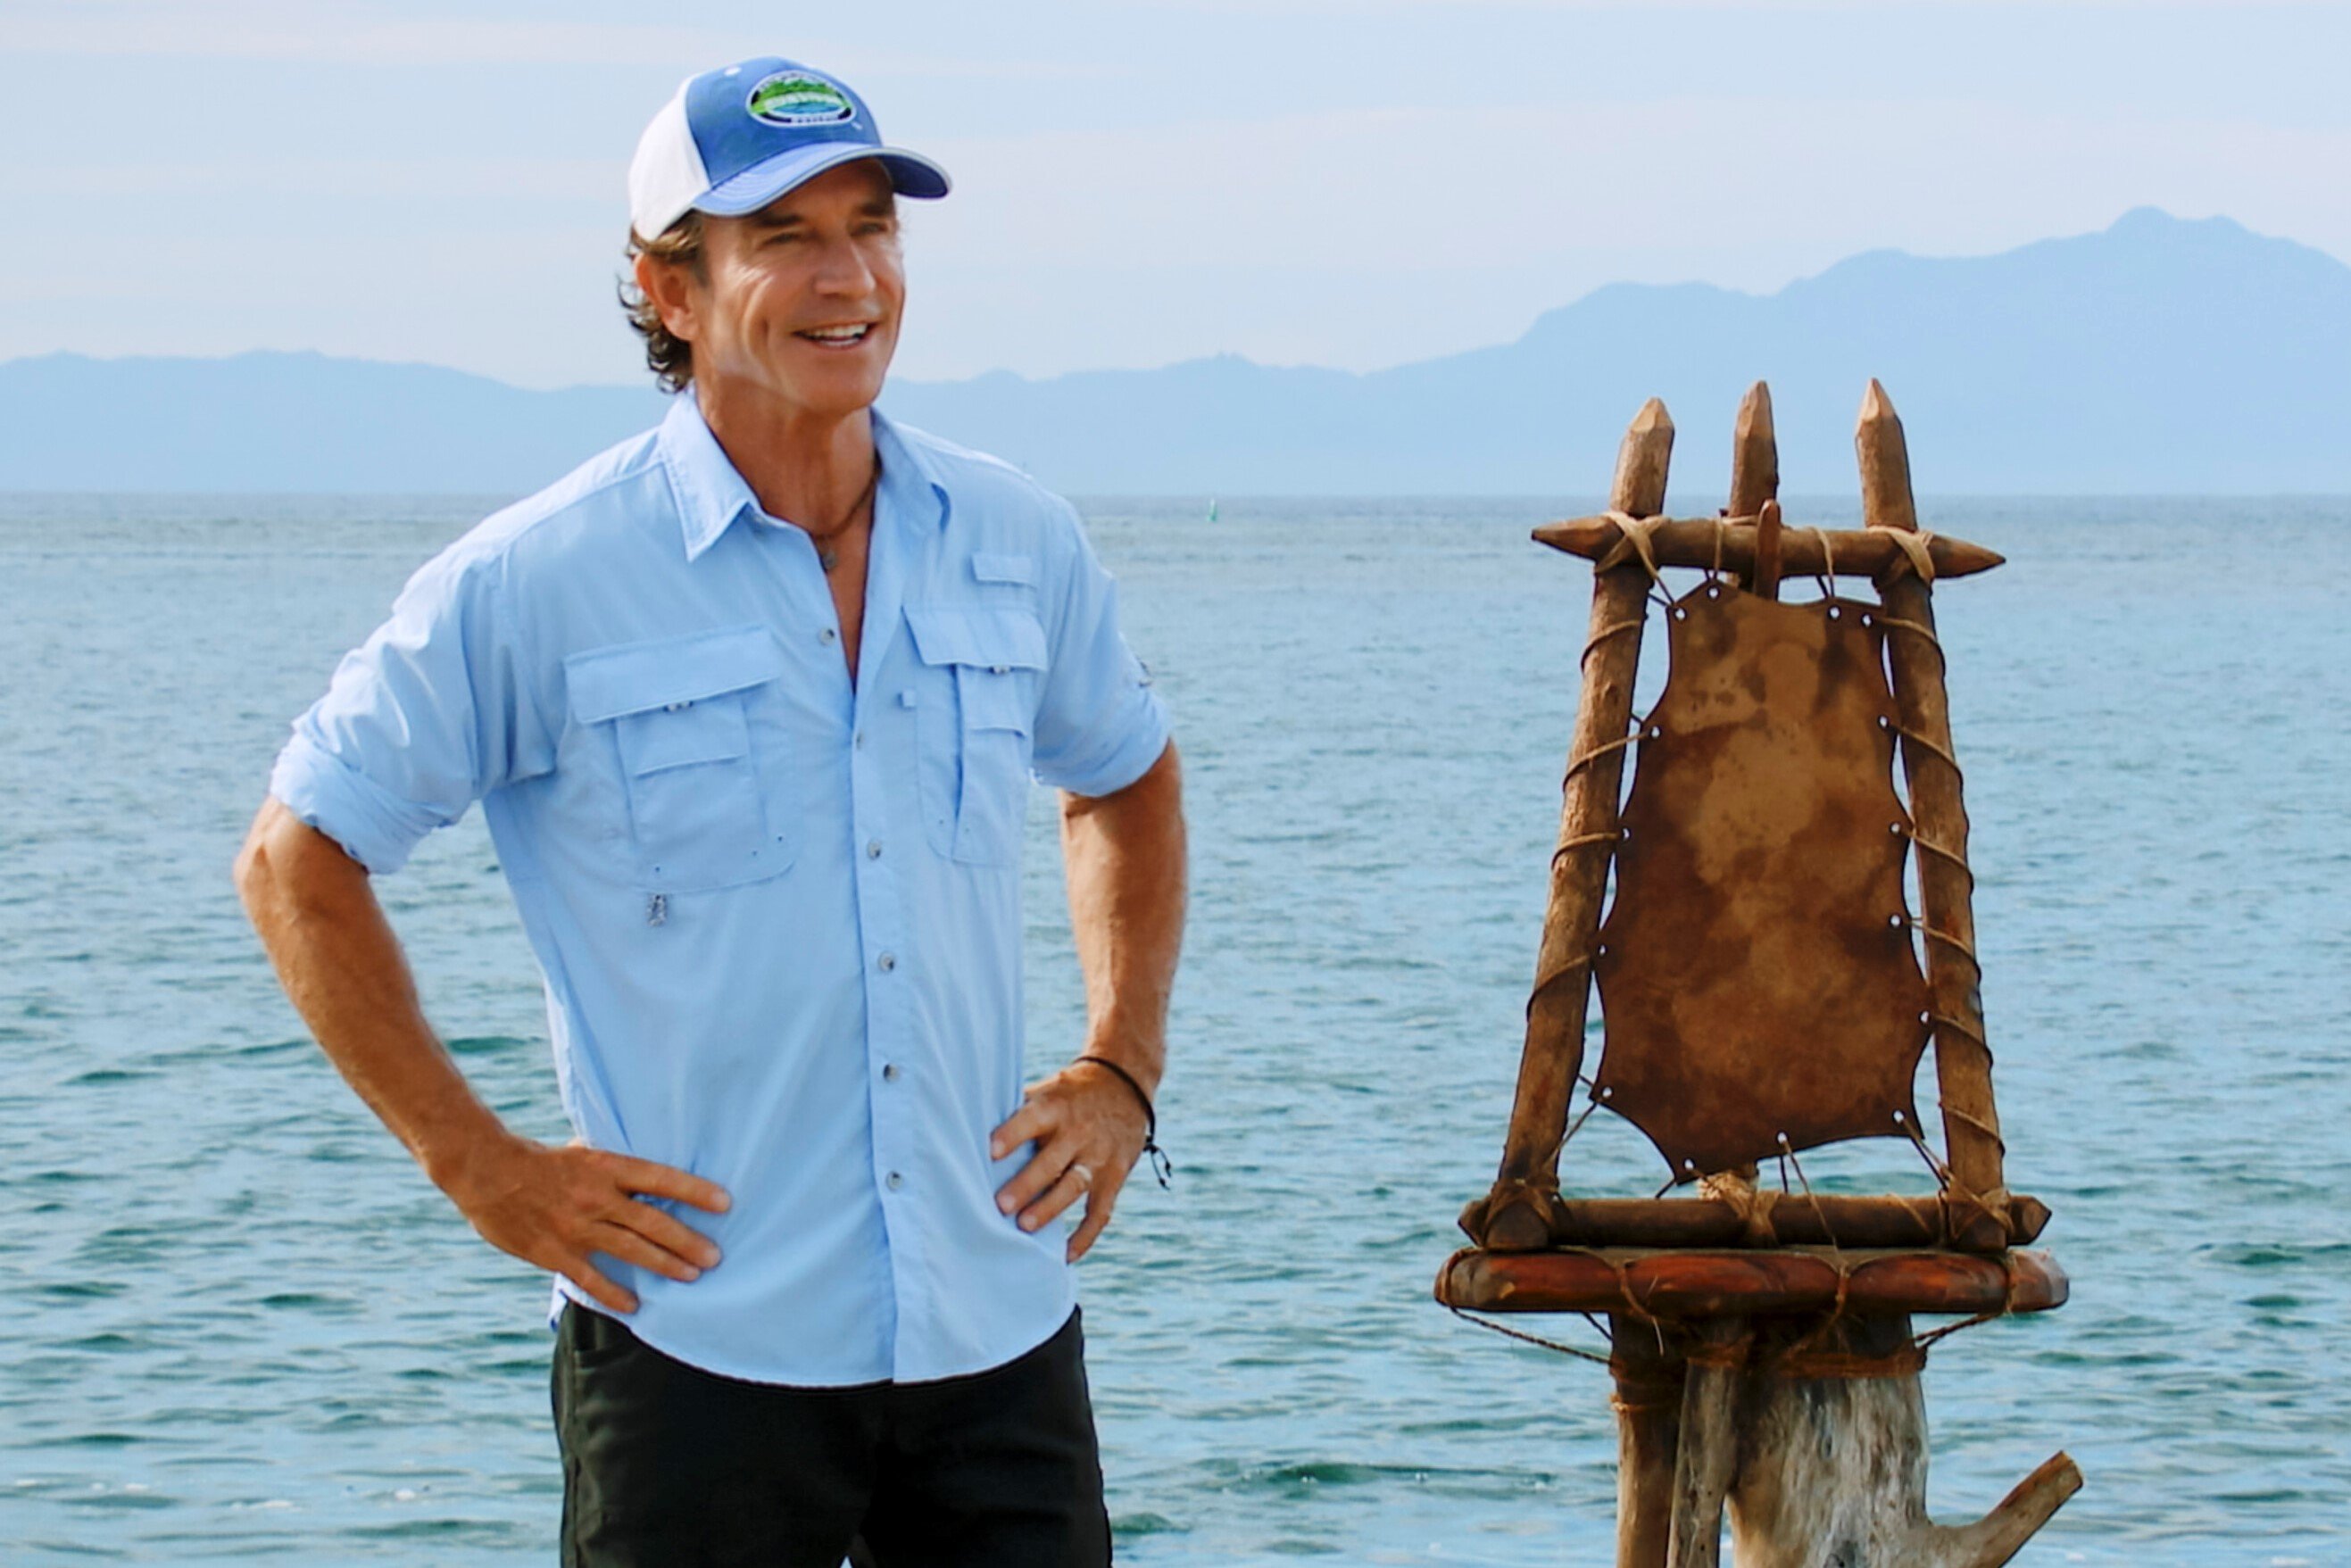 Jeff Probst, who interacts with castaway in 'Survivor' on CBS, wears a light blue button-up shirt with rolled-up sleeves, black pants, and a blue and white 'Survivor' baseball cap.